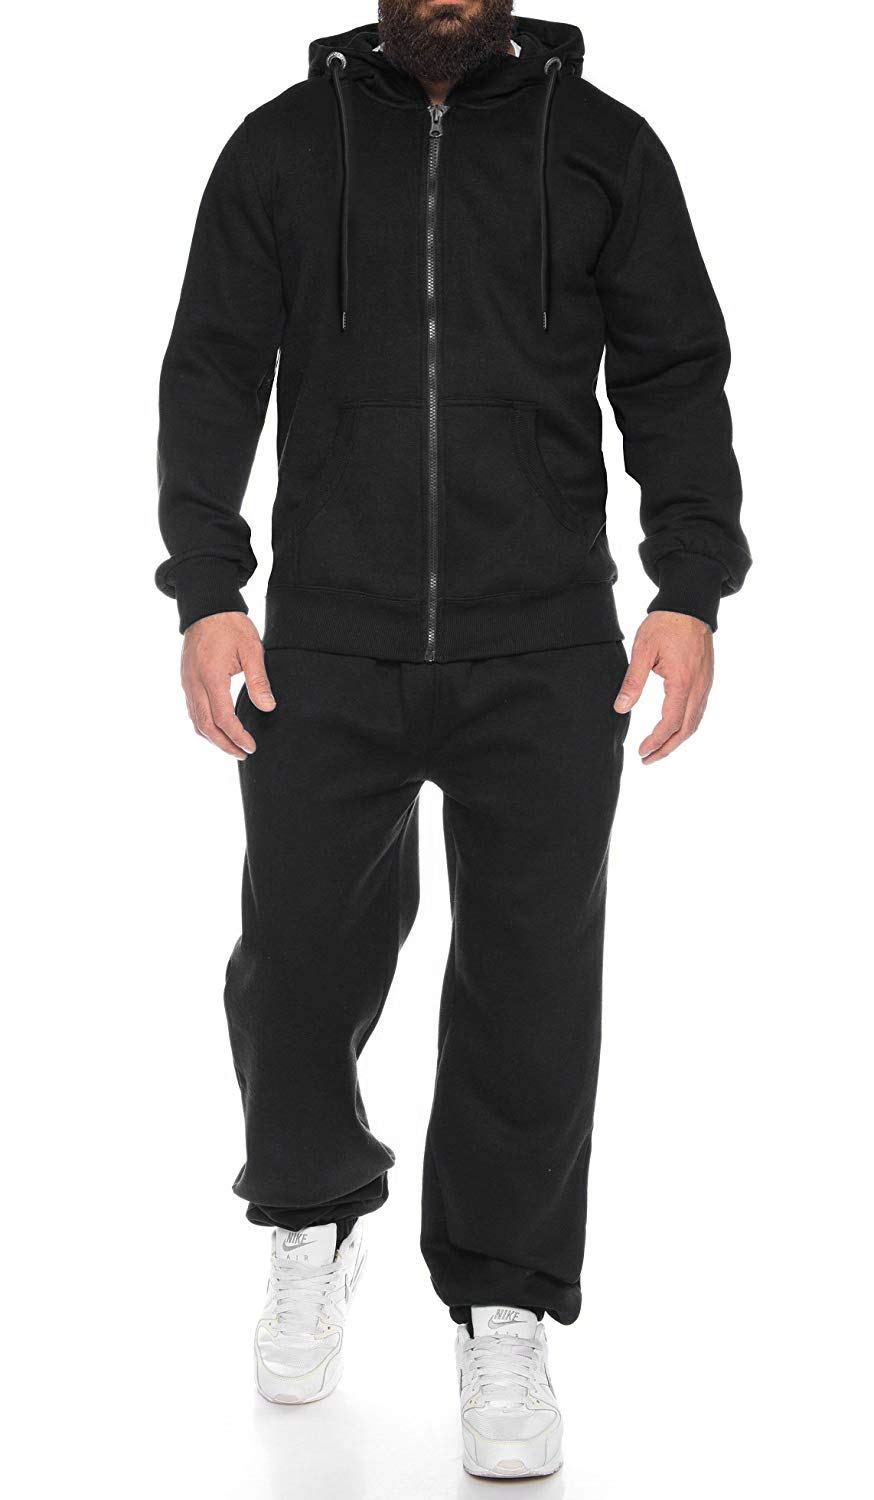 COOFANDY Men's Hoodies And Sweatpants Set Athletic Two Pieces